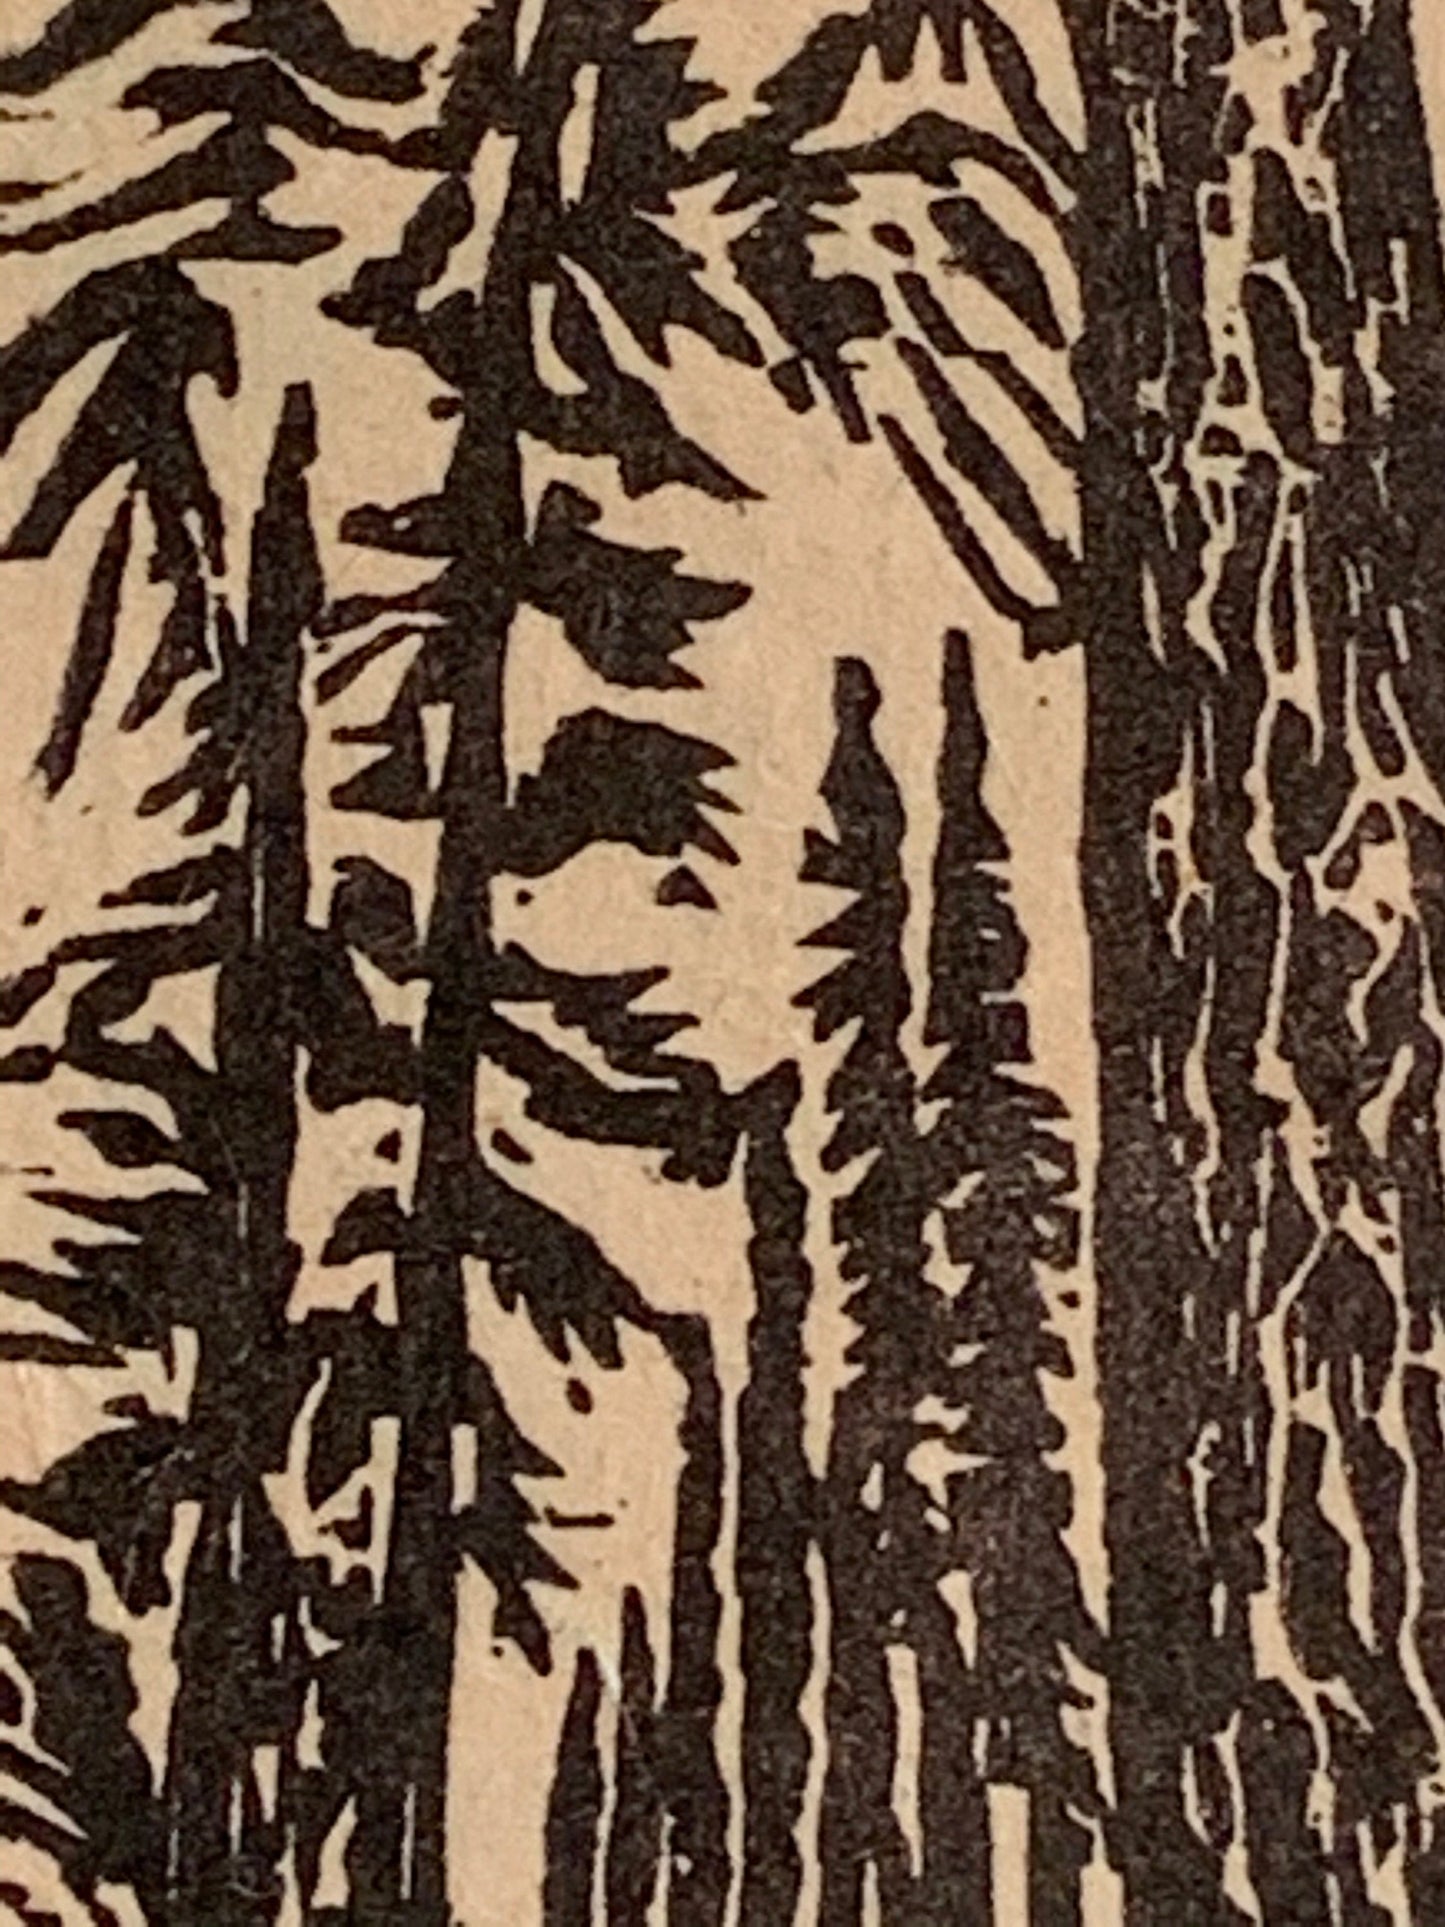 White Pine Tree Small Original Woodcut from Alpine Mountain Trees Landscape Collection